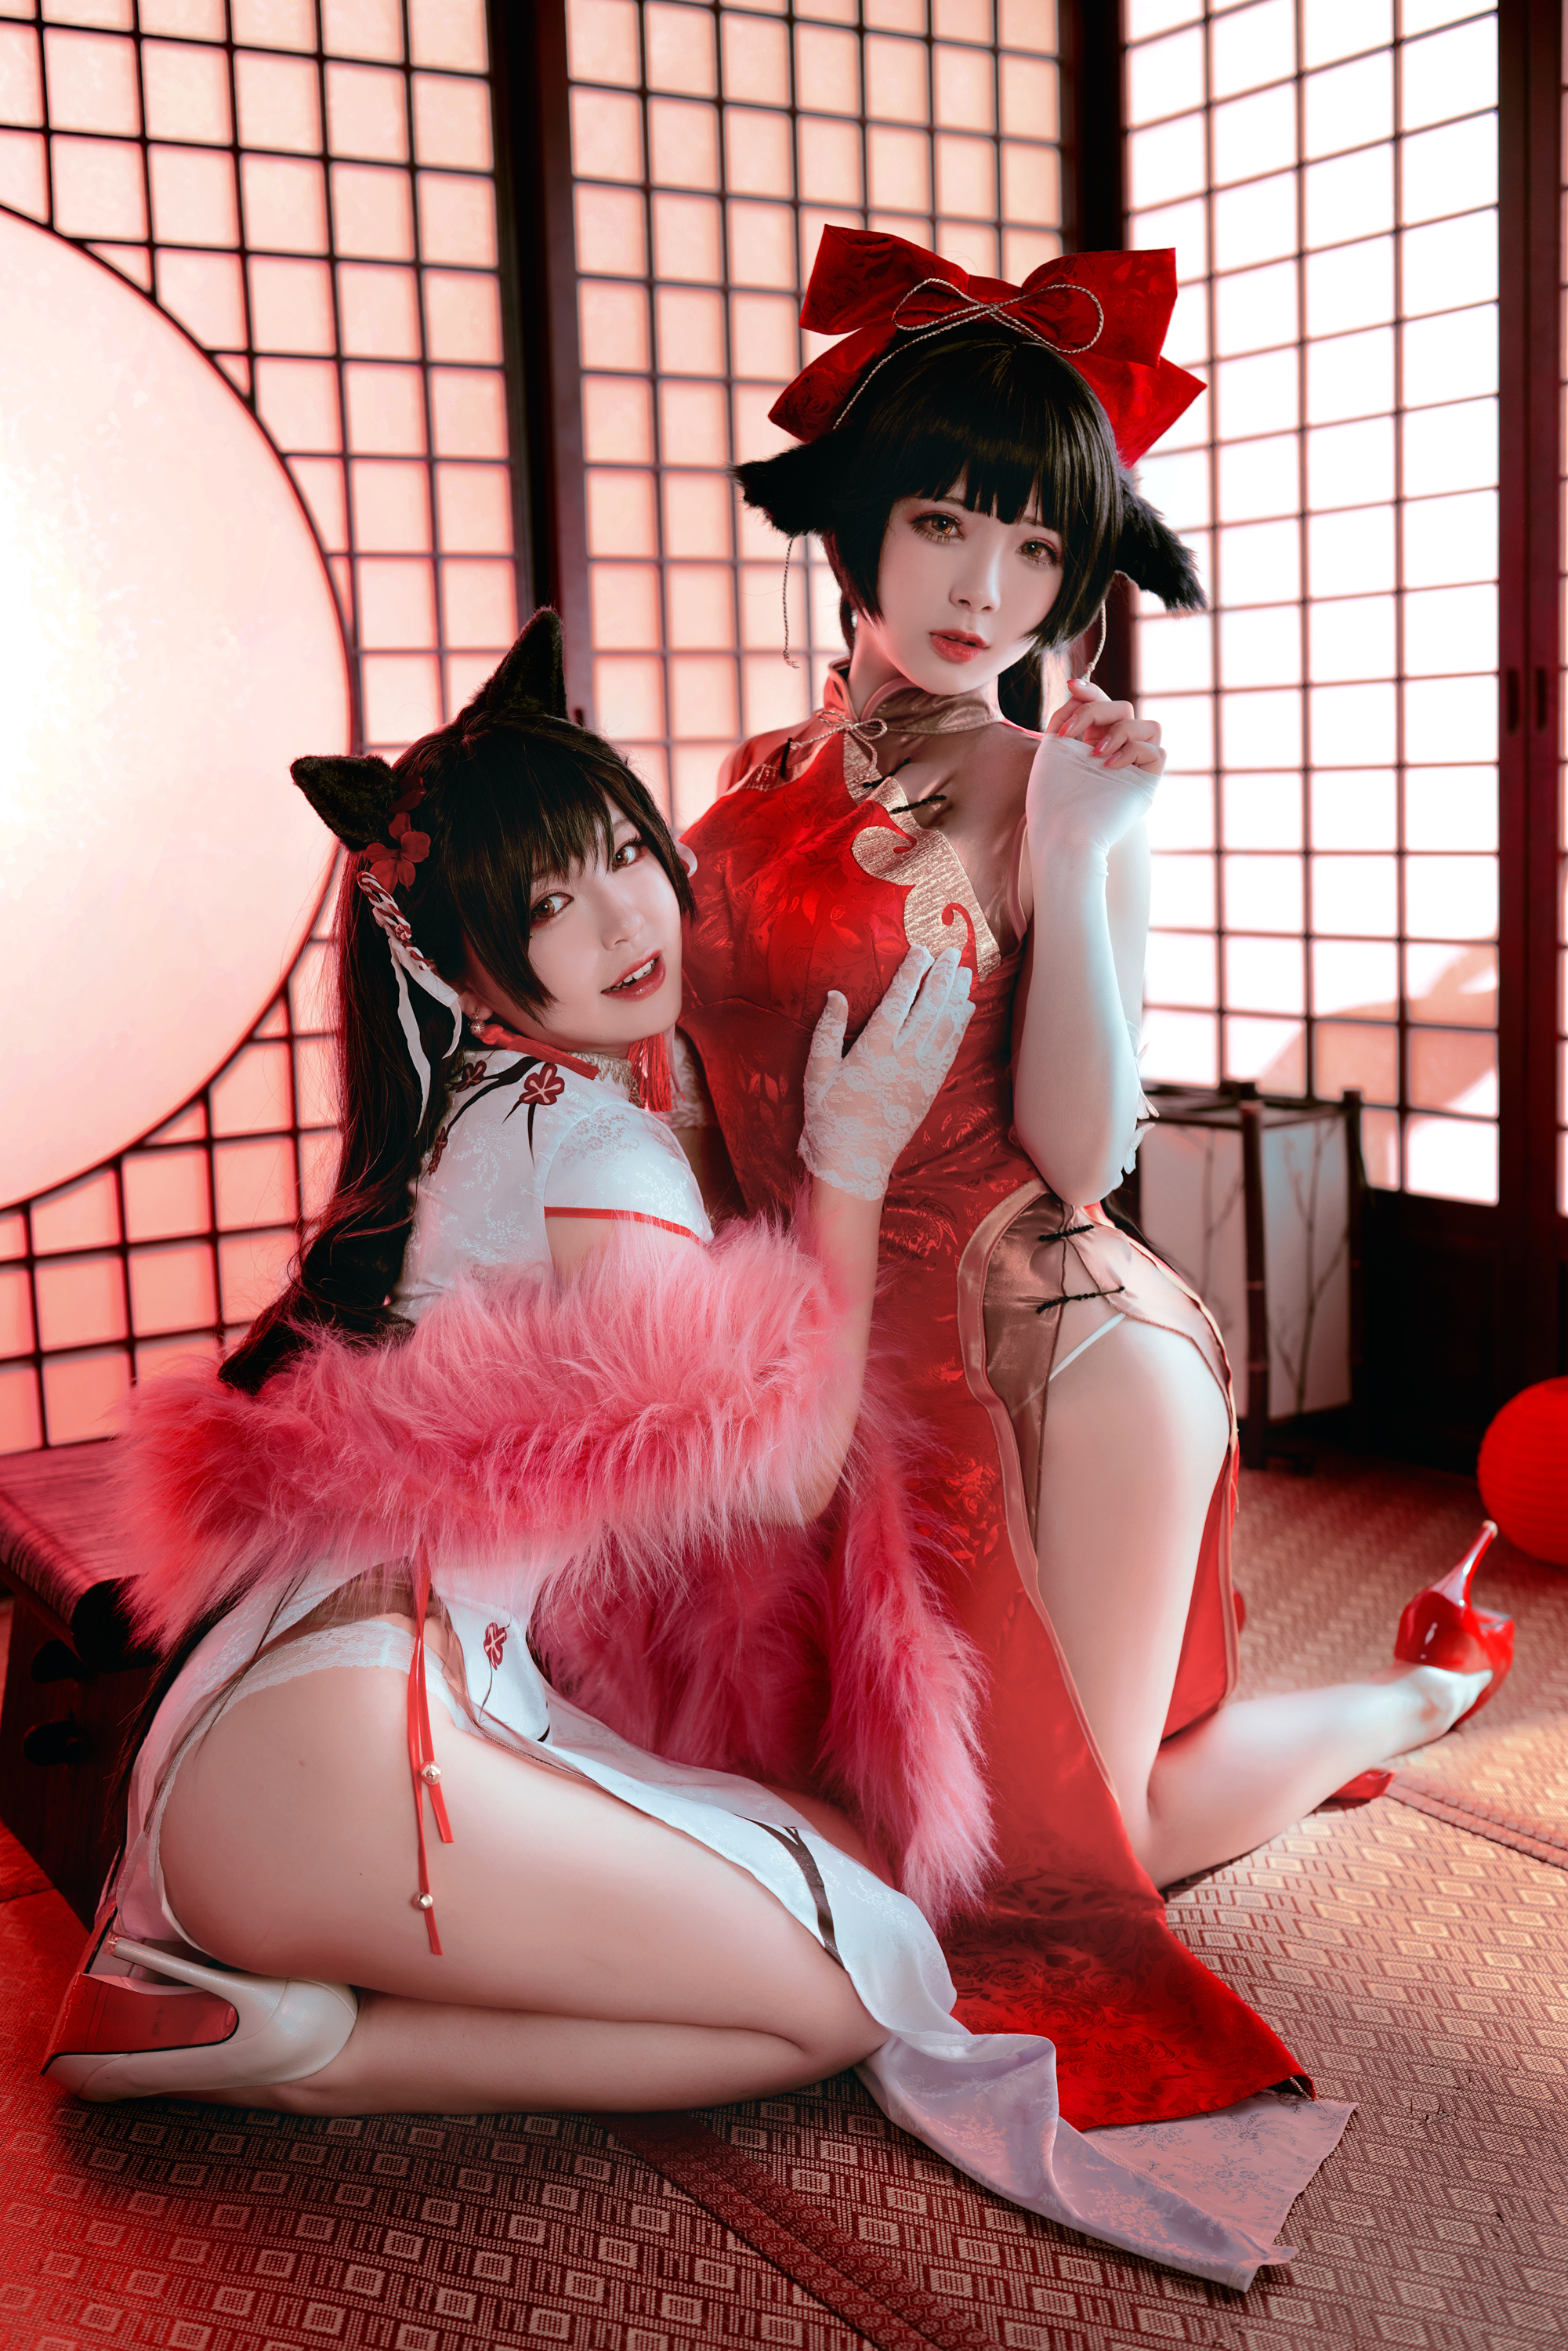 Cosplayers Banbanko and Yue have teamed up to present their fans an elegant...